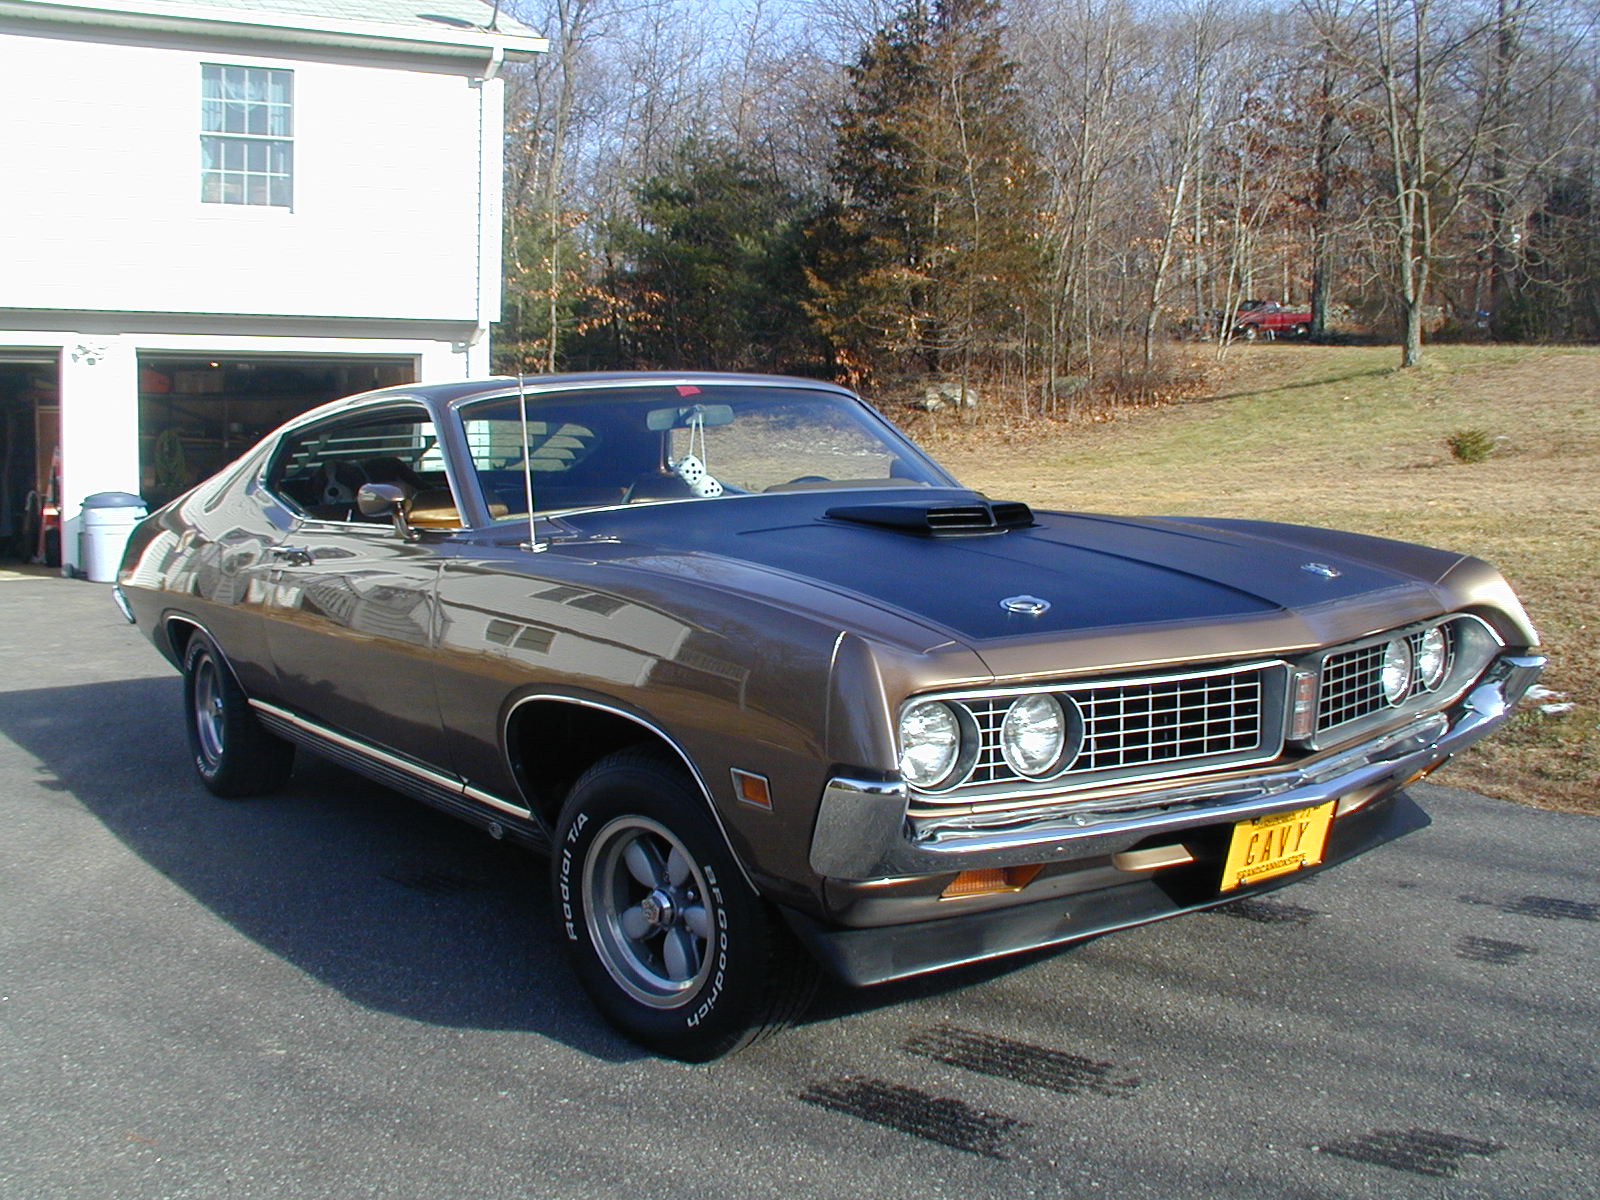 Ford Torino desktop wallpaper featuring a stylish and powerful vehicle amidst a captivating background.